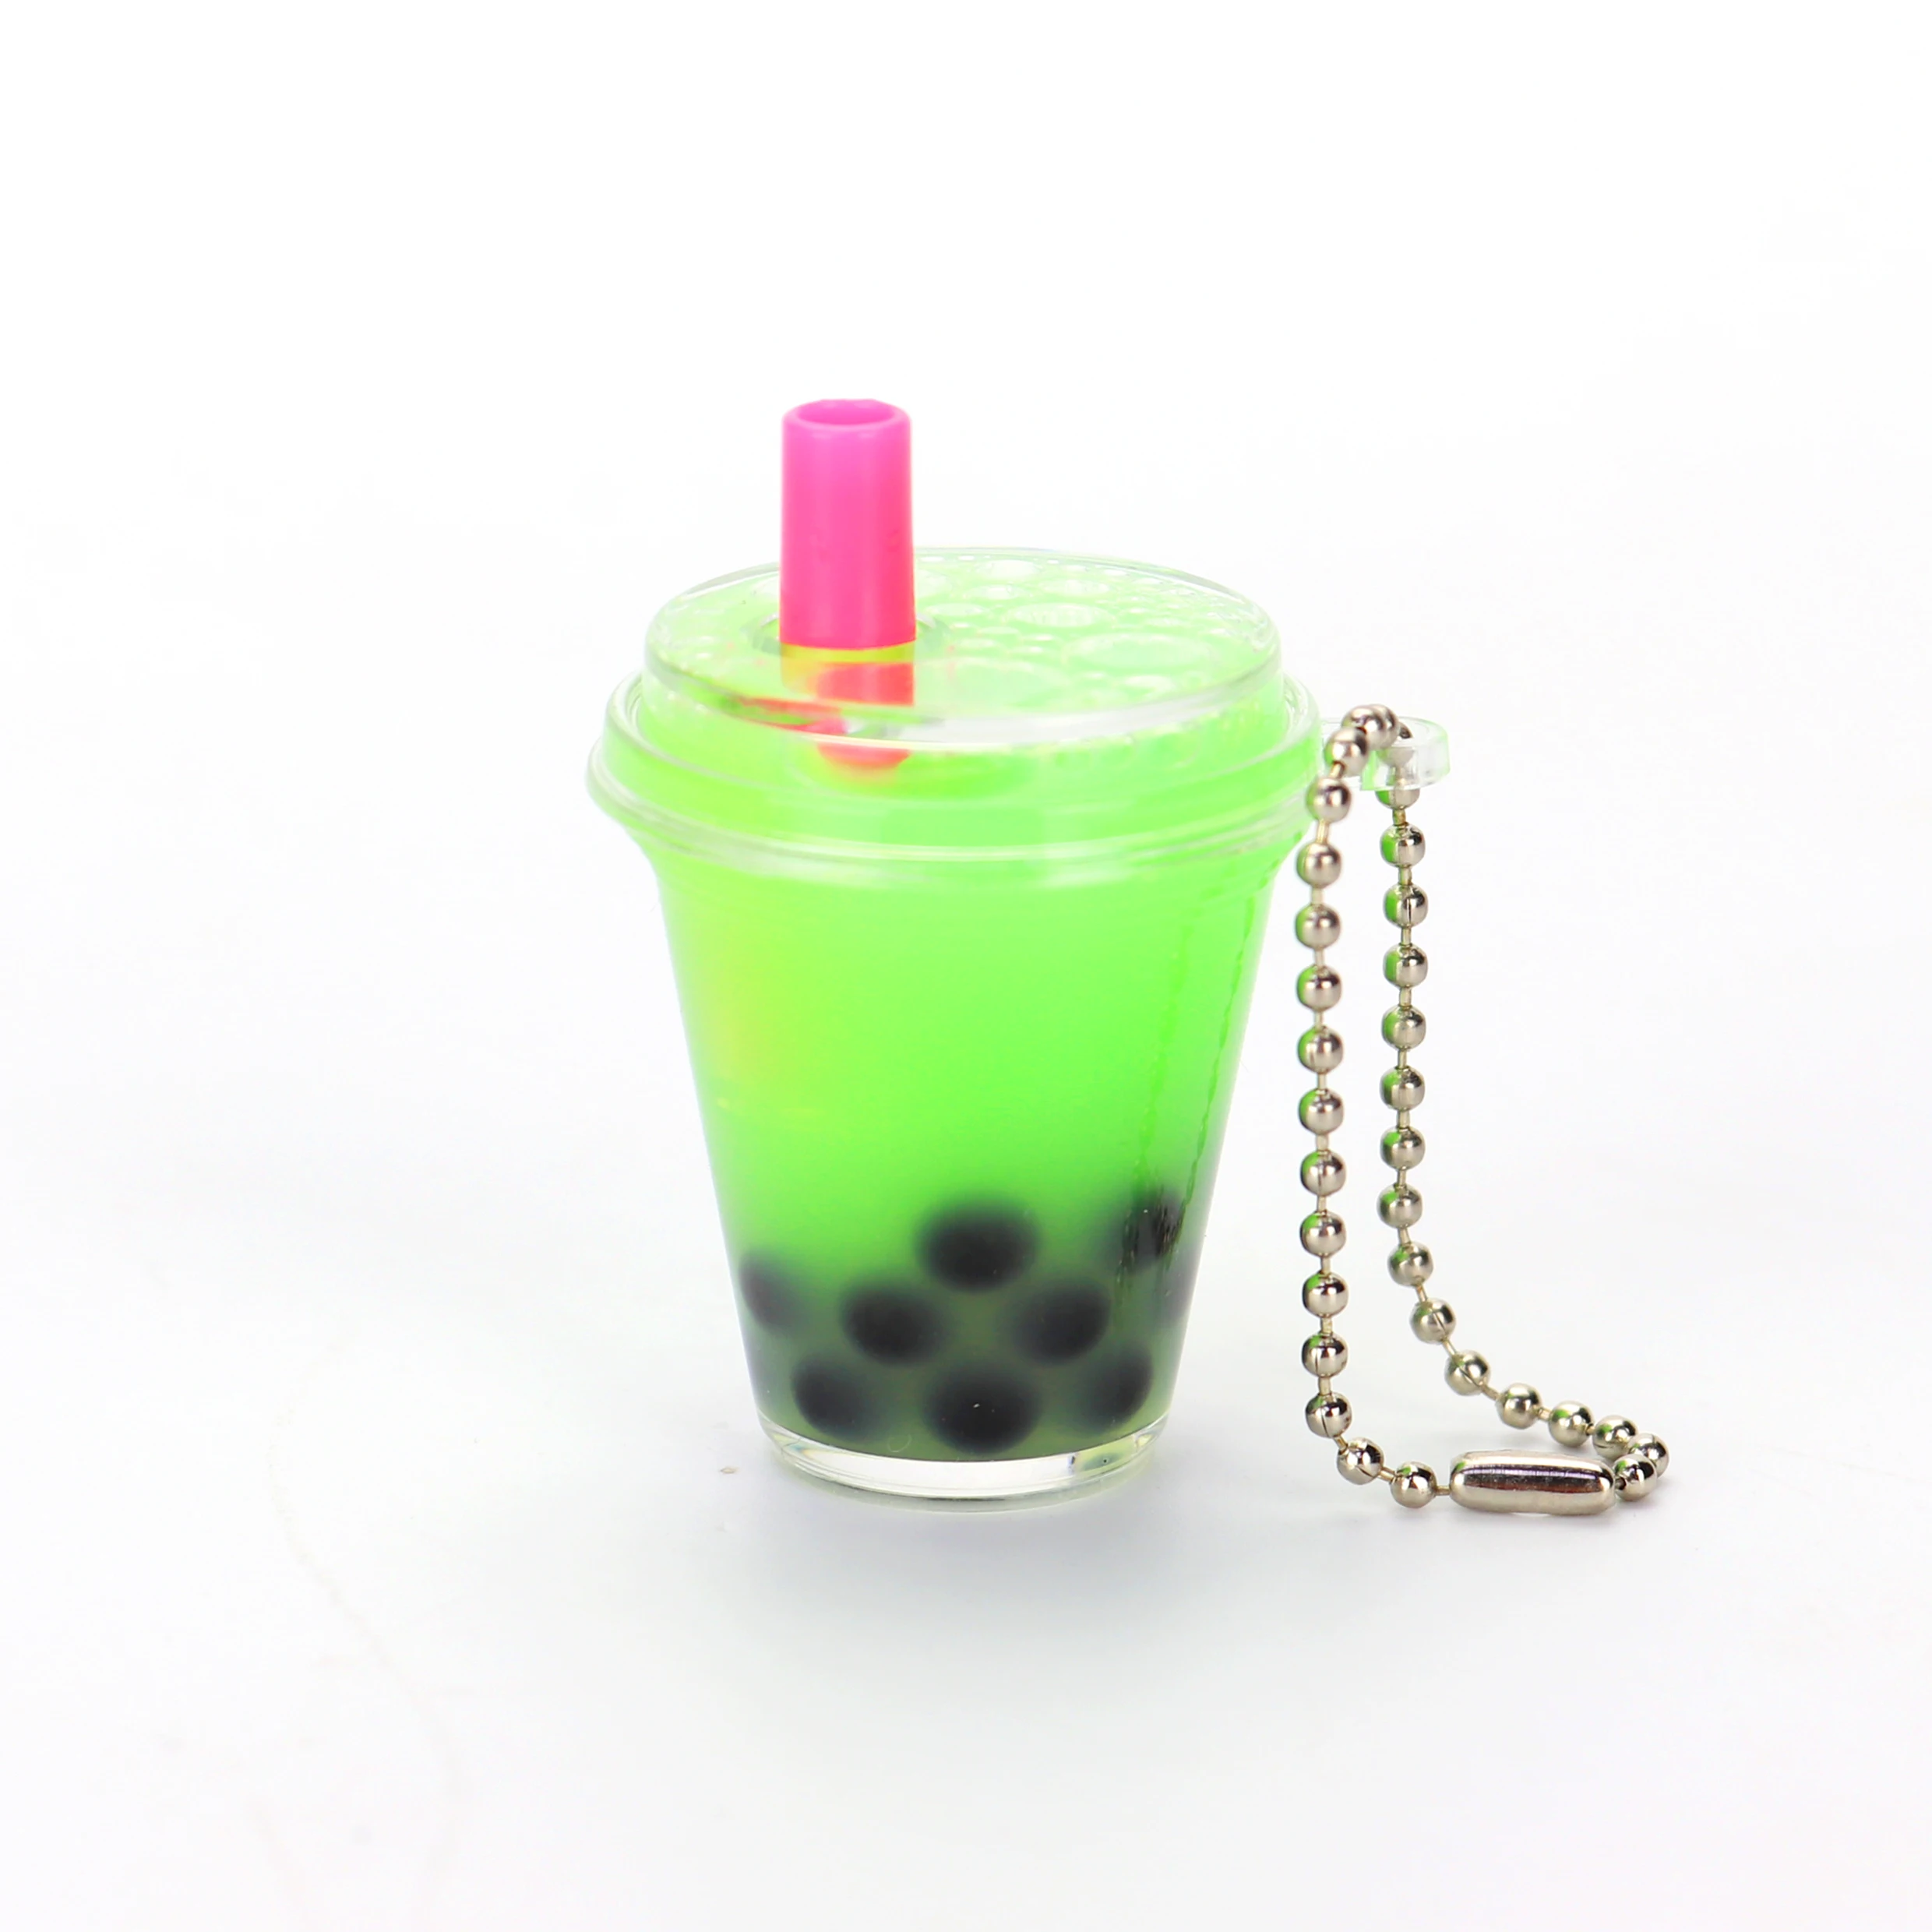 Aju Nice Seventeen Reusable Bubble Tea Cup Boba Tea/smoothie Glass Cup With  Stainless Steel Straw Seventeen Carat Say the Name Kpop 